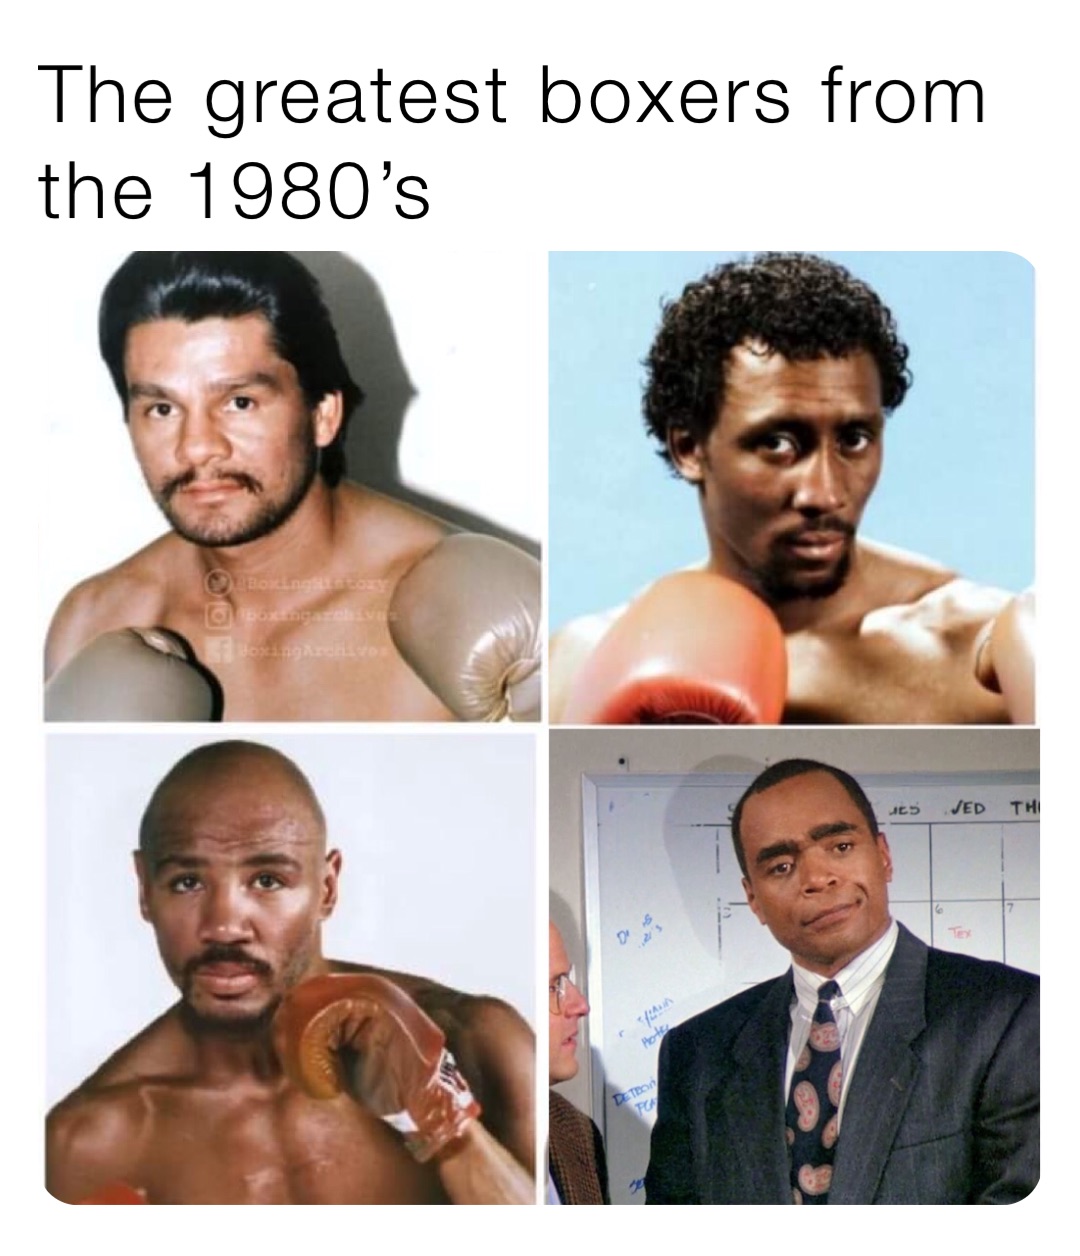 The greatest boxers from the 1980’s